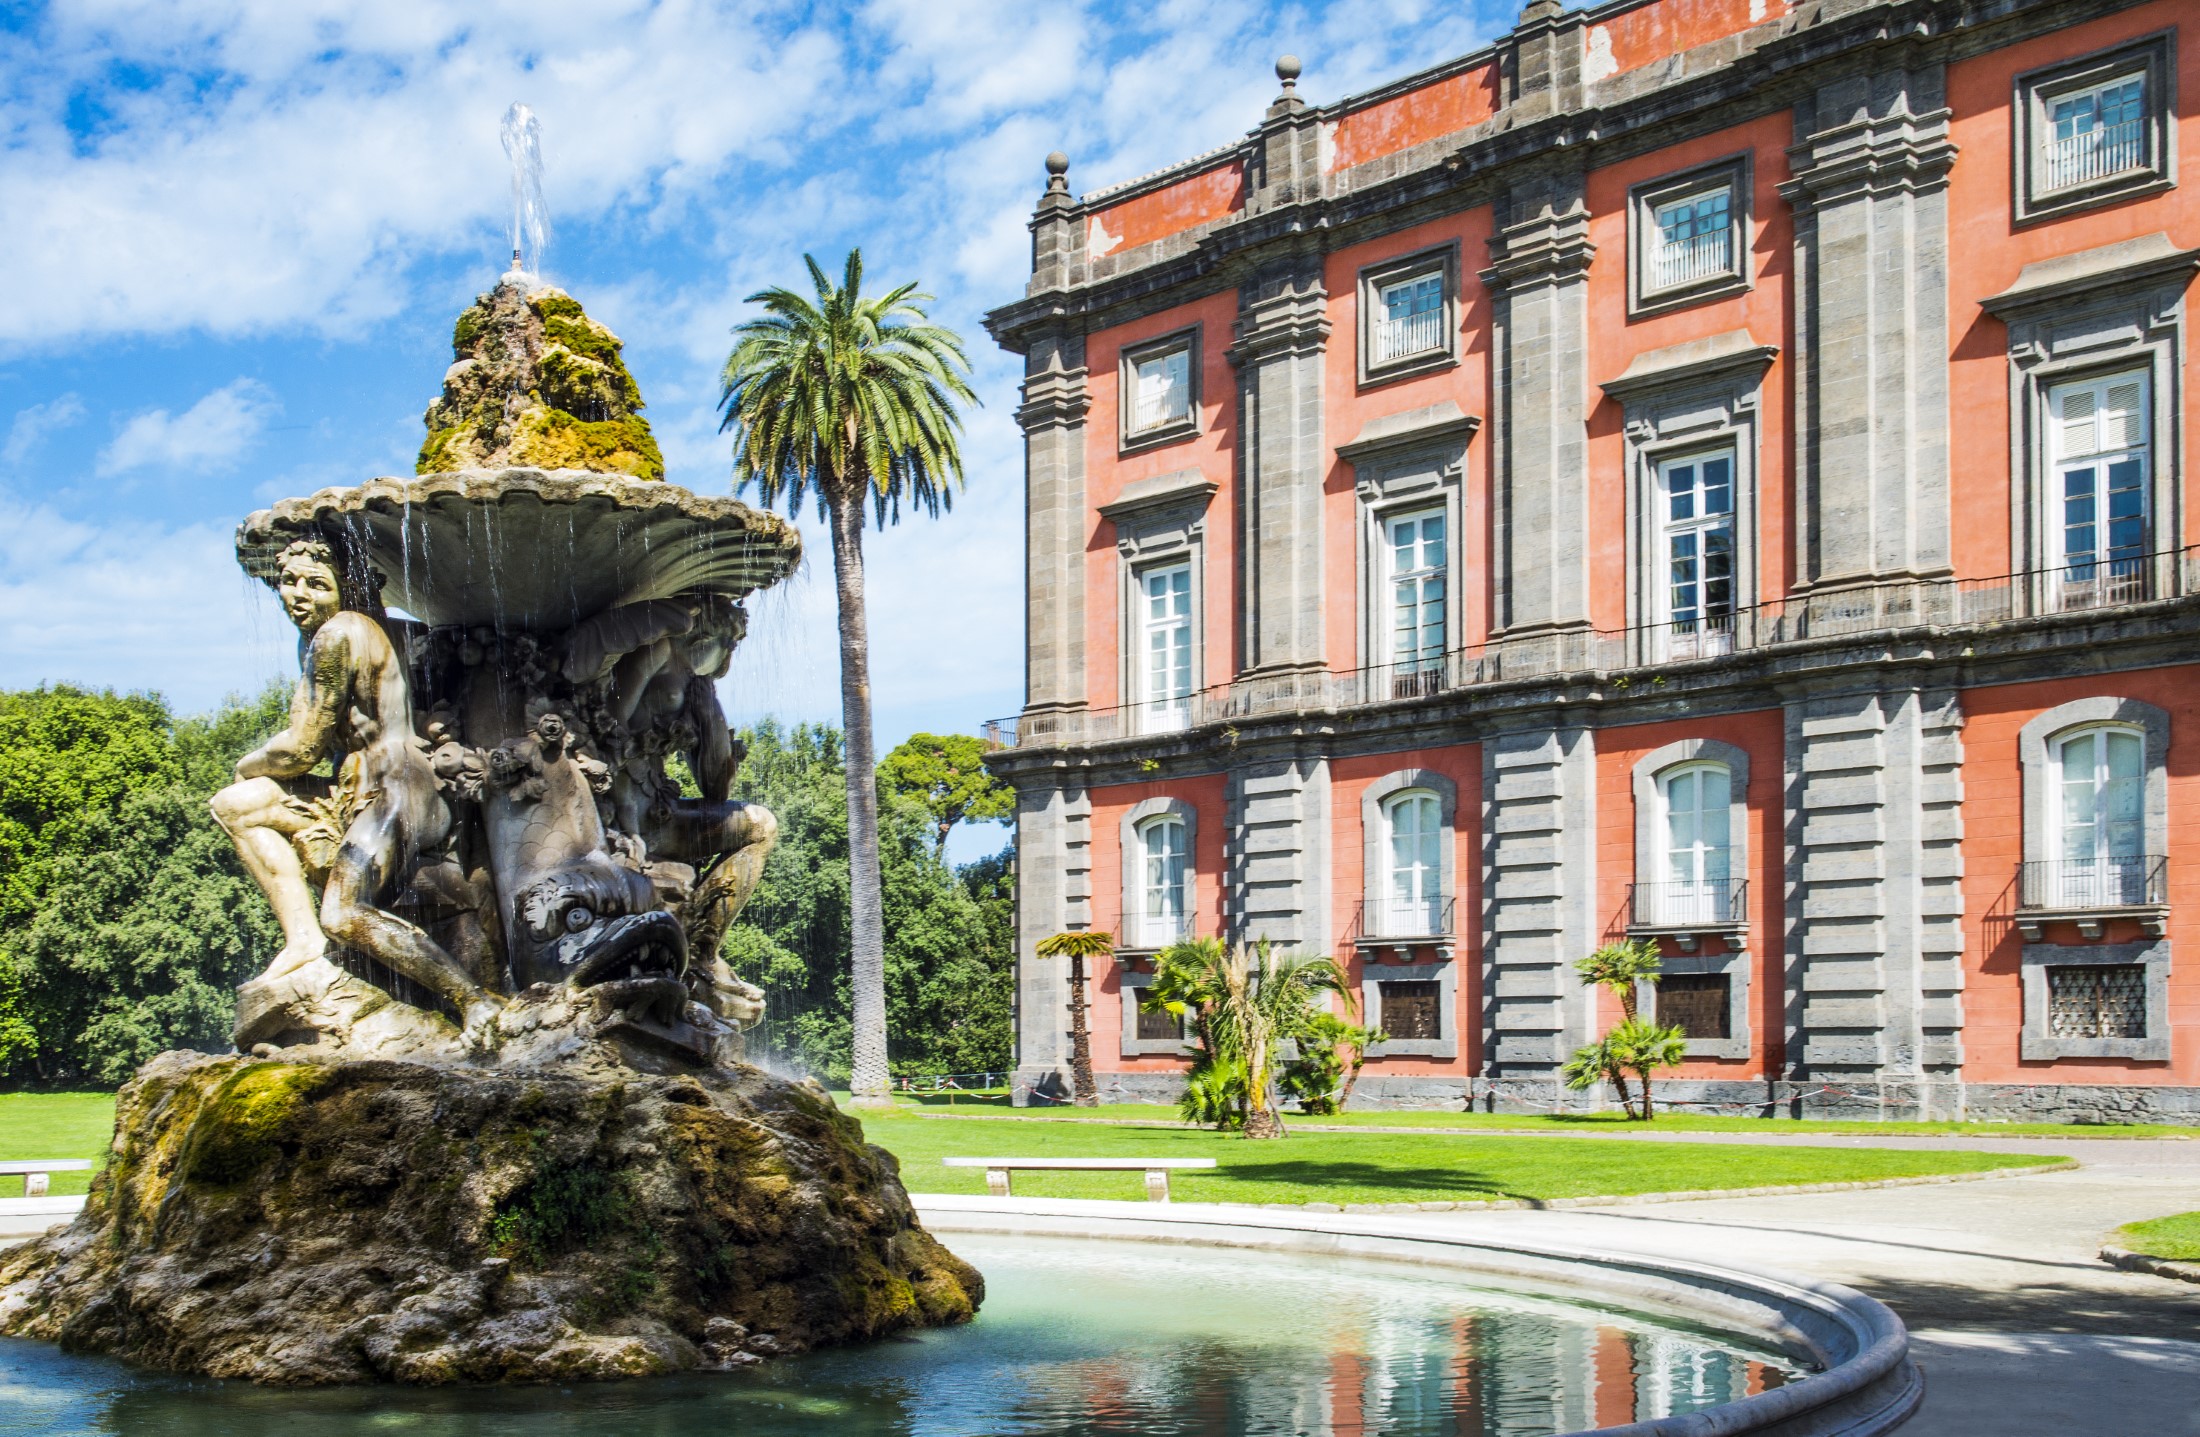 Muzeum Capodimonte, Italy, Naples, the Capodimonte royal palace seen from the park with the fountain